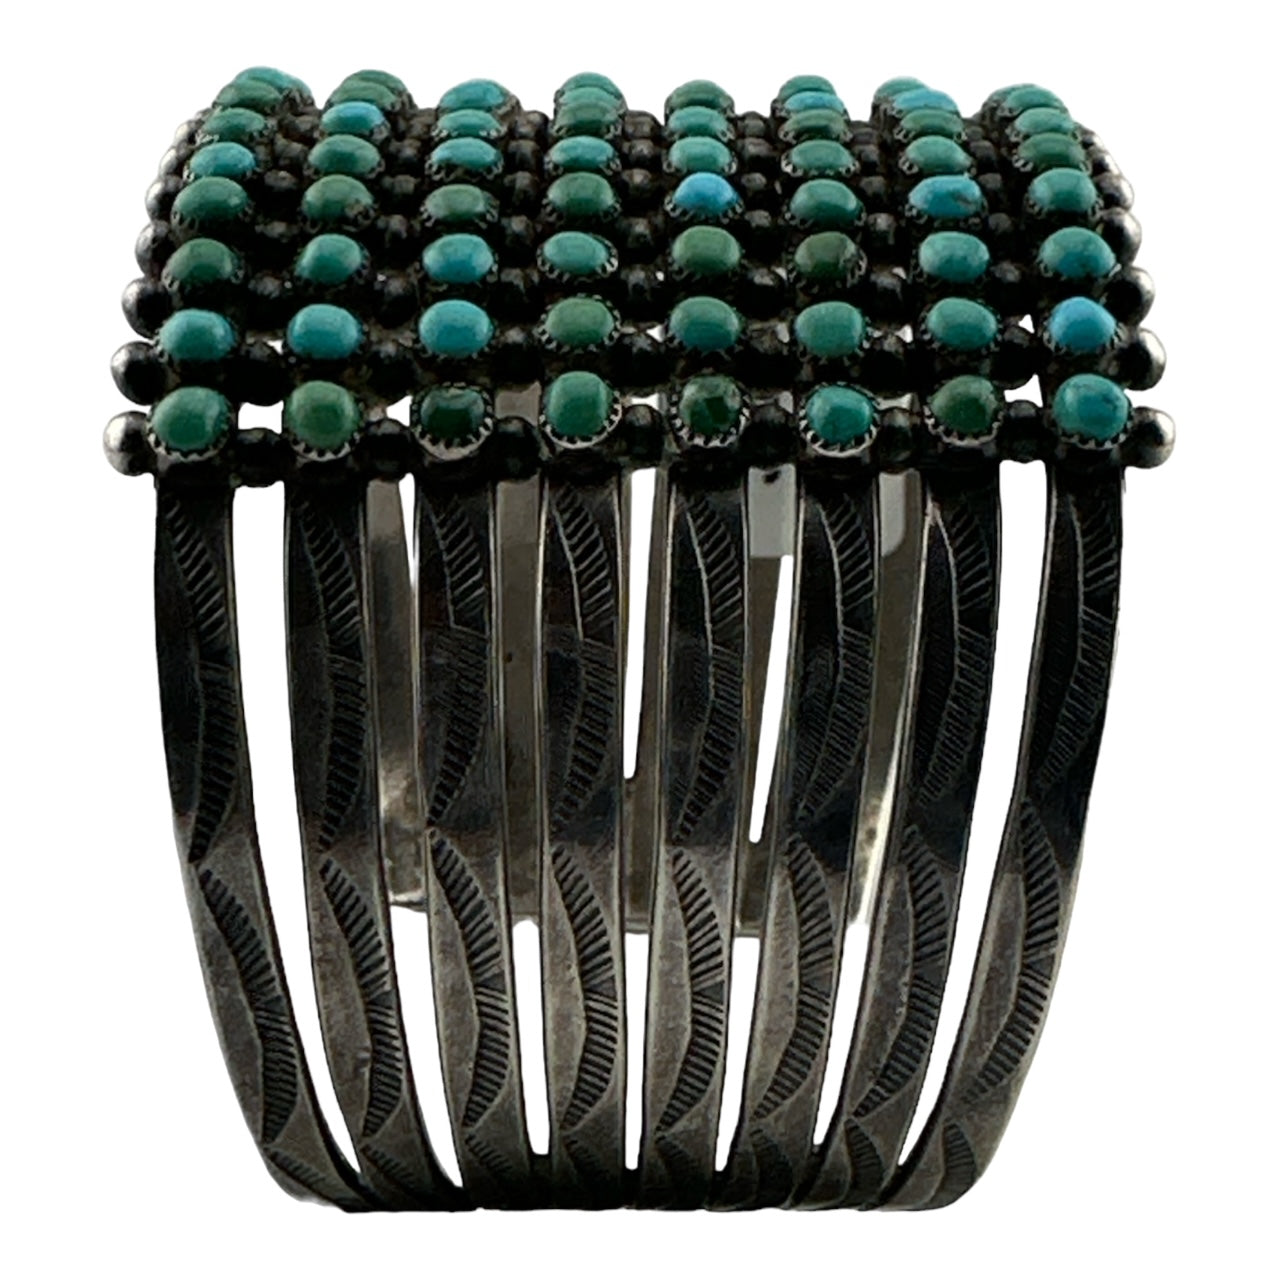 Vintage Zuni Very Fine 8 Row Snake Eye Turquoise Bracelet, authenitic native american jewelry for sale, Telluride jewelry store, telluride gallery